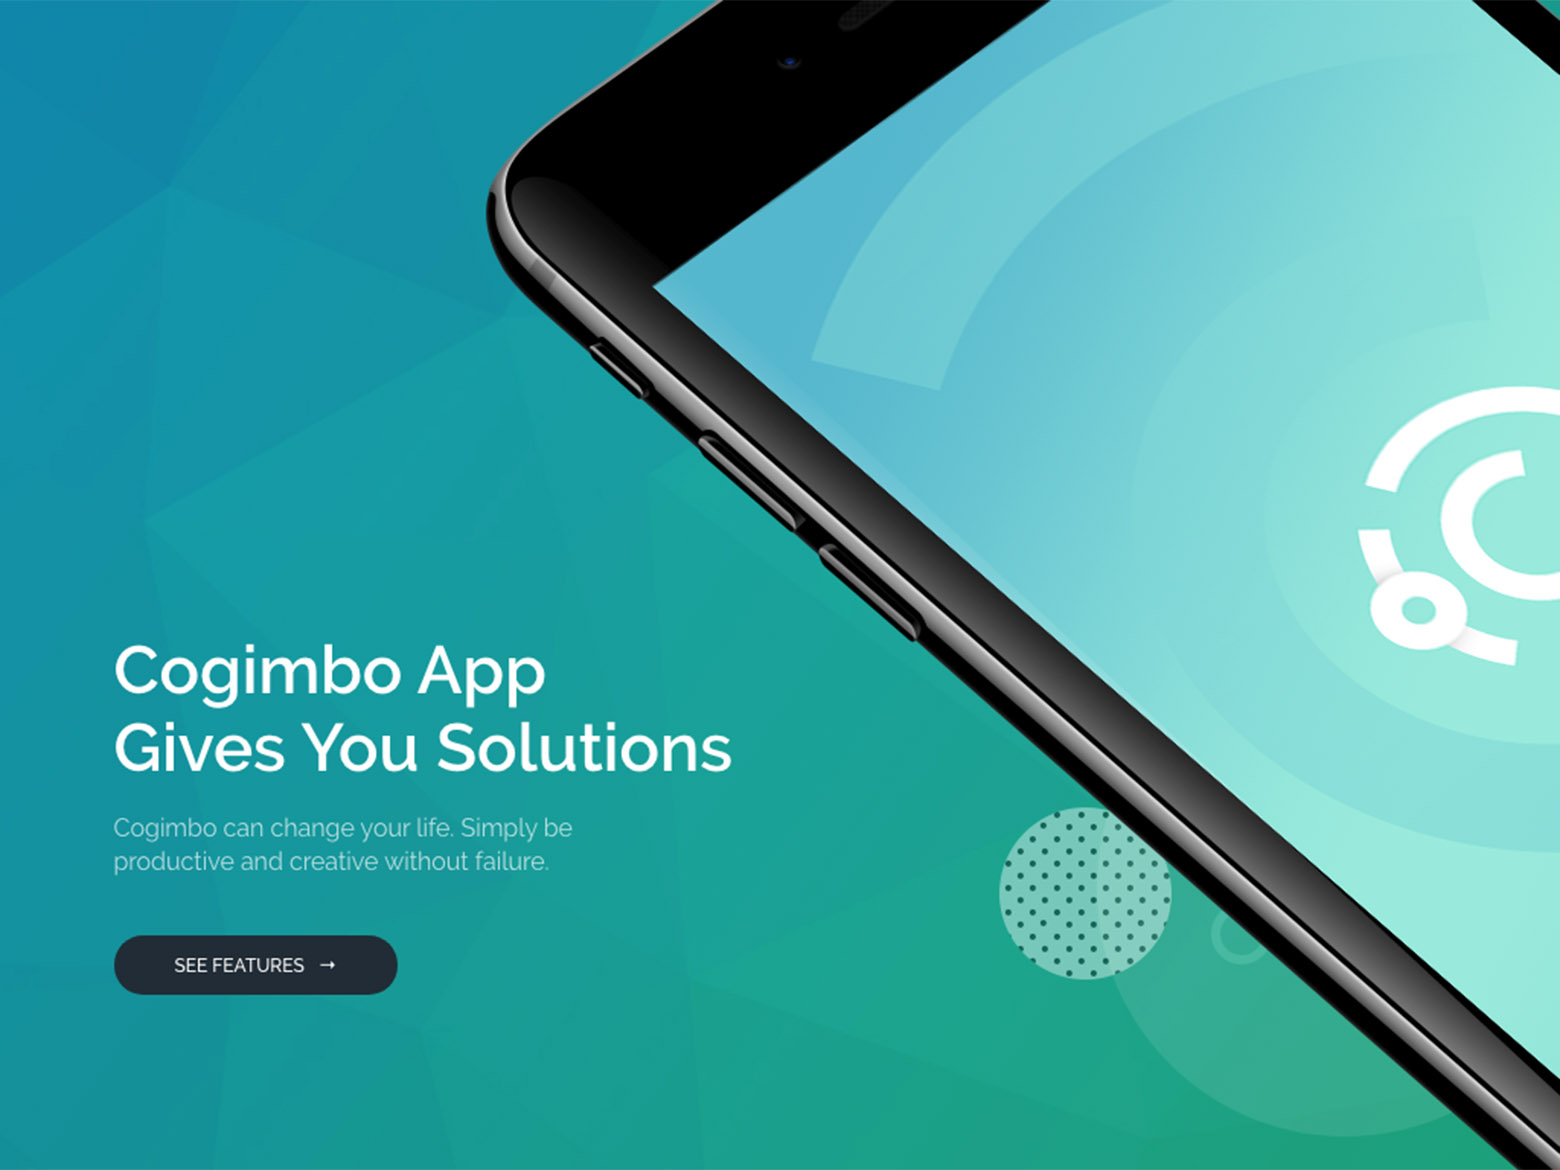 5-awesome-after-effects-template-mobile-app-presentation-1-mobile-app